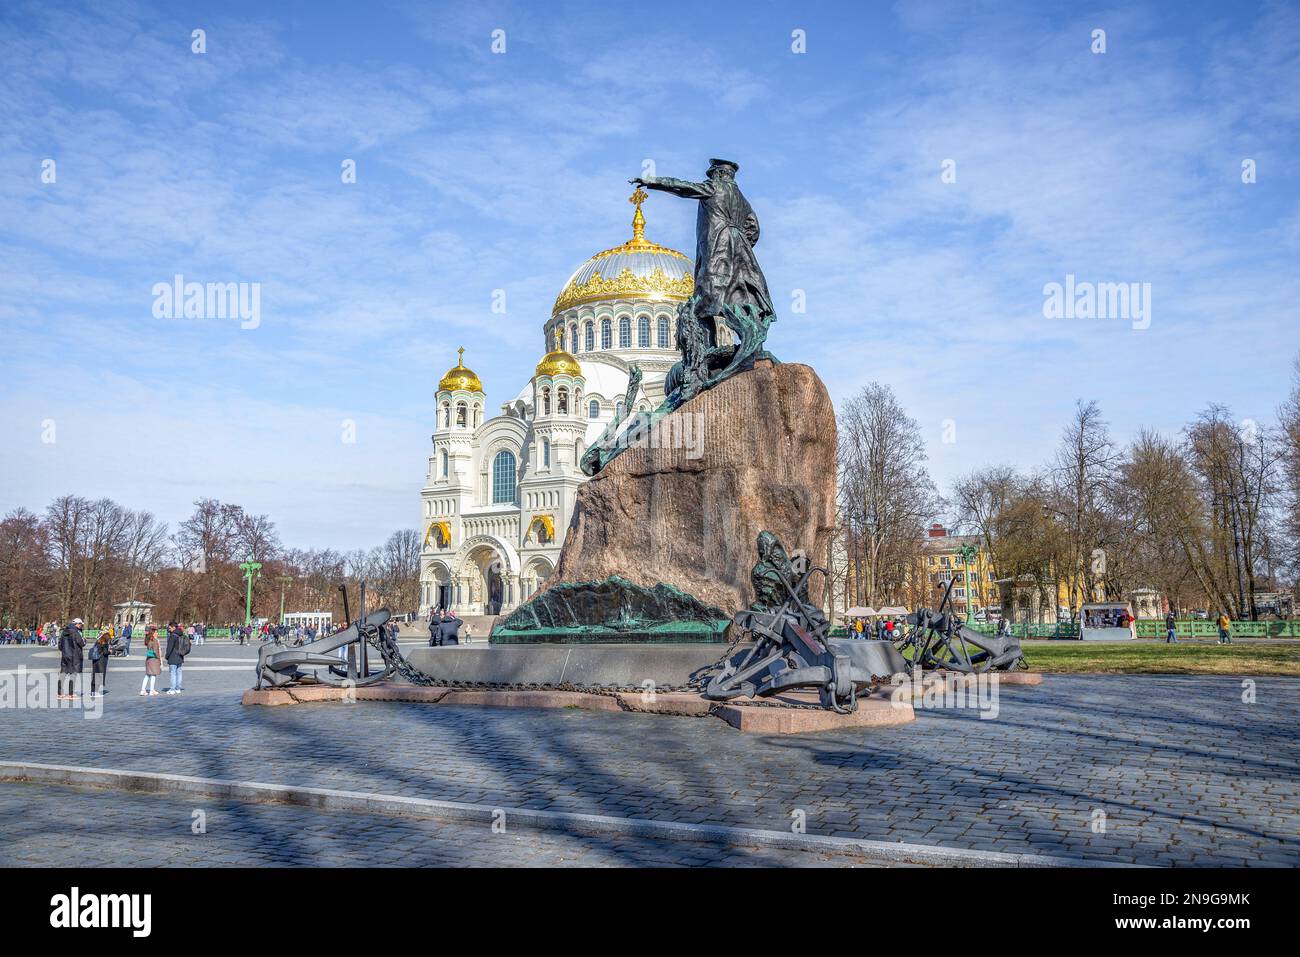 KRONSTADT, RUSSIA - MAY 01, 2022: Monument to the Russian Admiral Makarov on the Anchor Square. Kronstadt Stock Photo